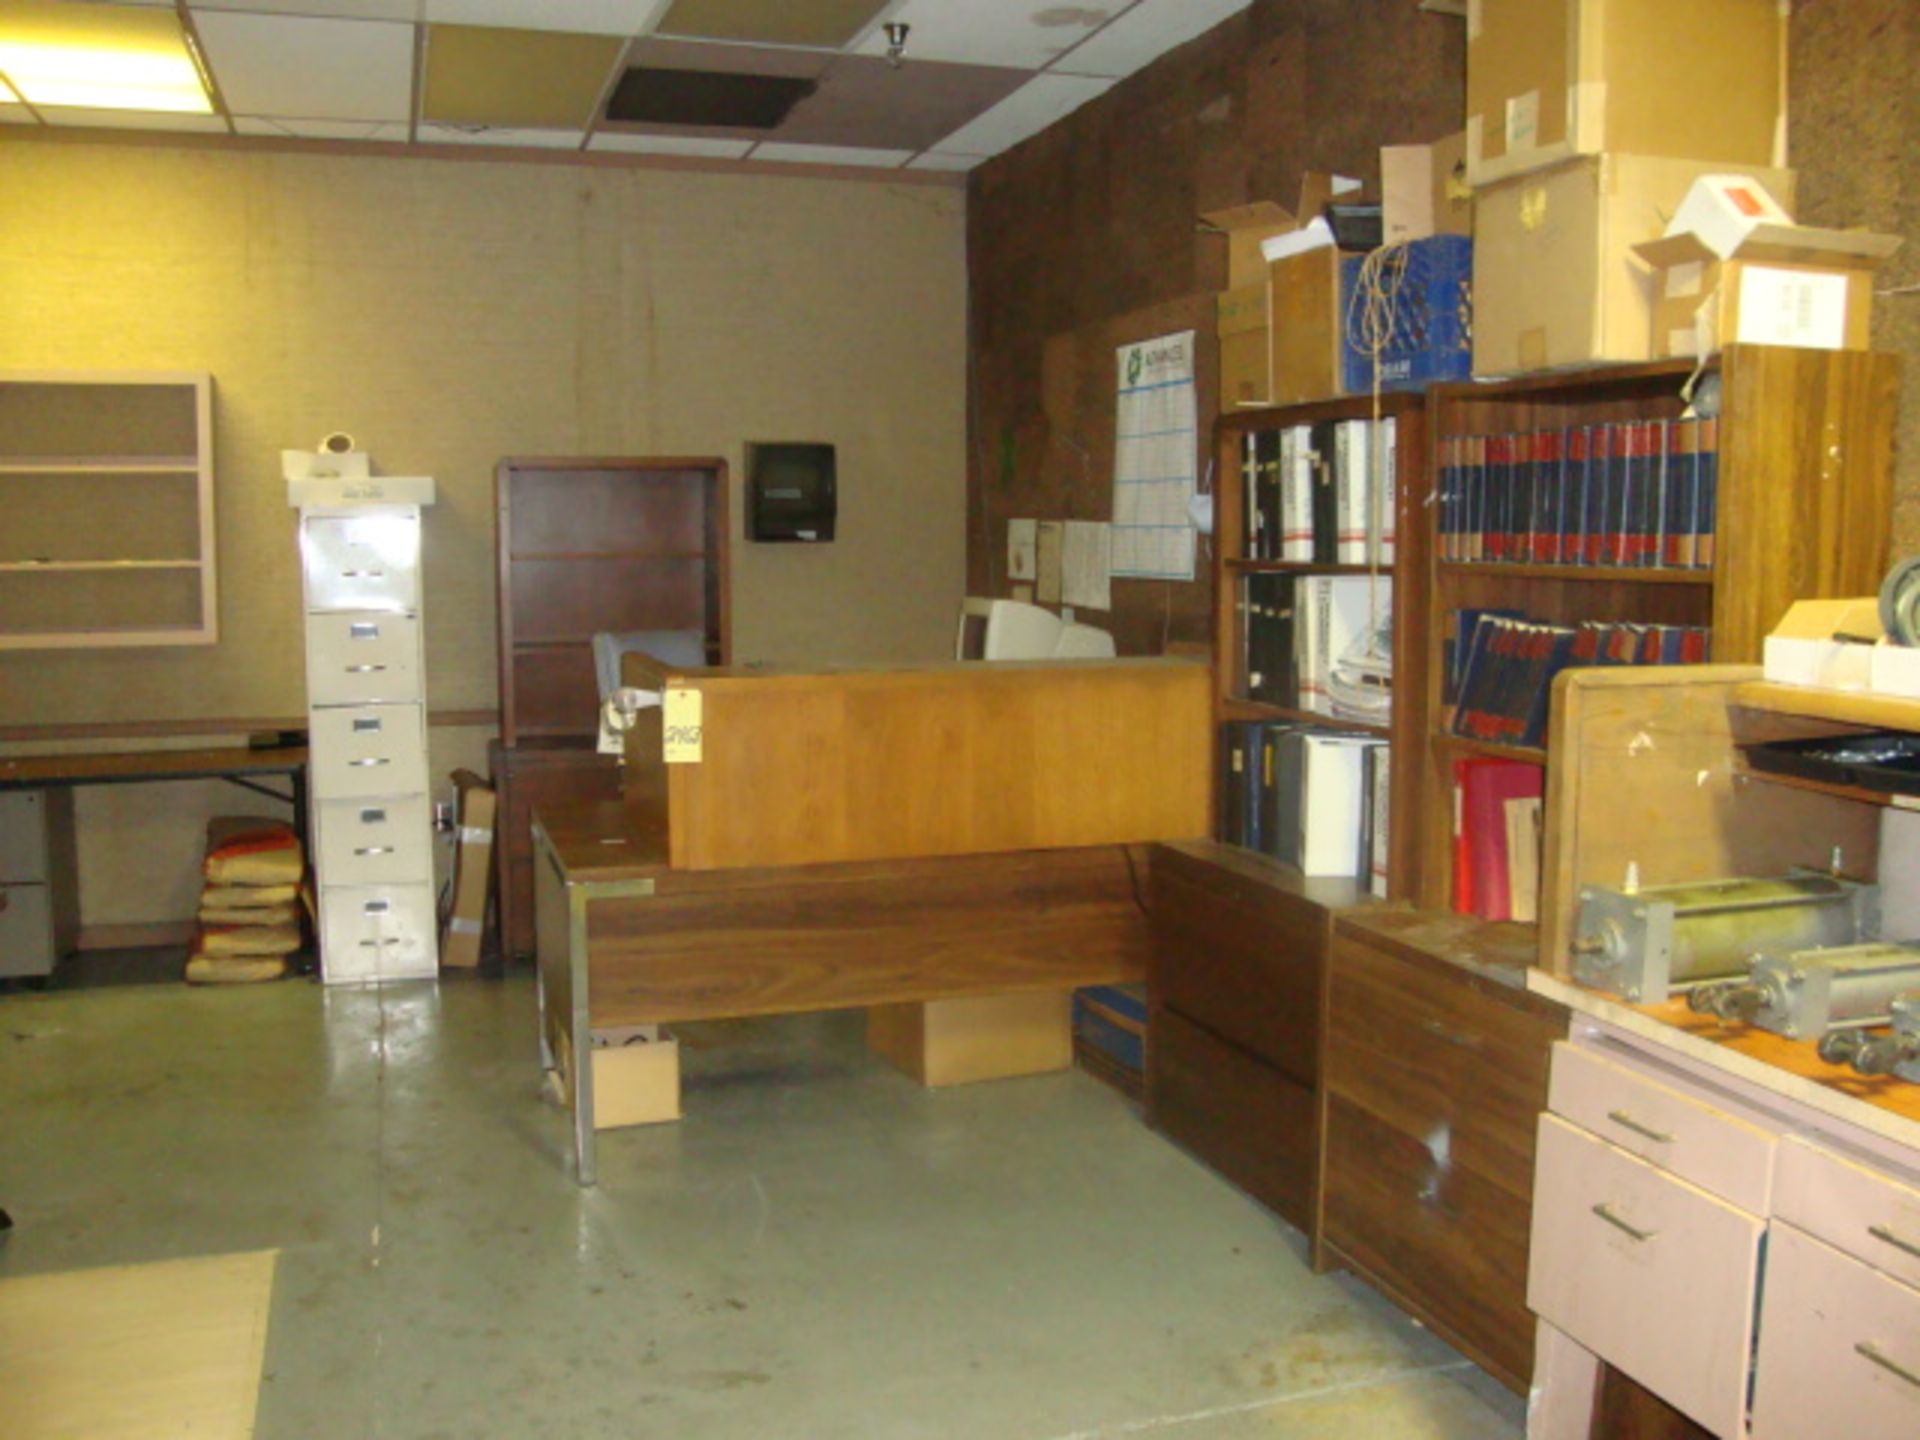 LOT OF OFFICE FURNITURE: desk, chairs, file cabinets